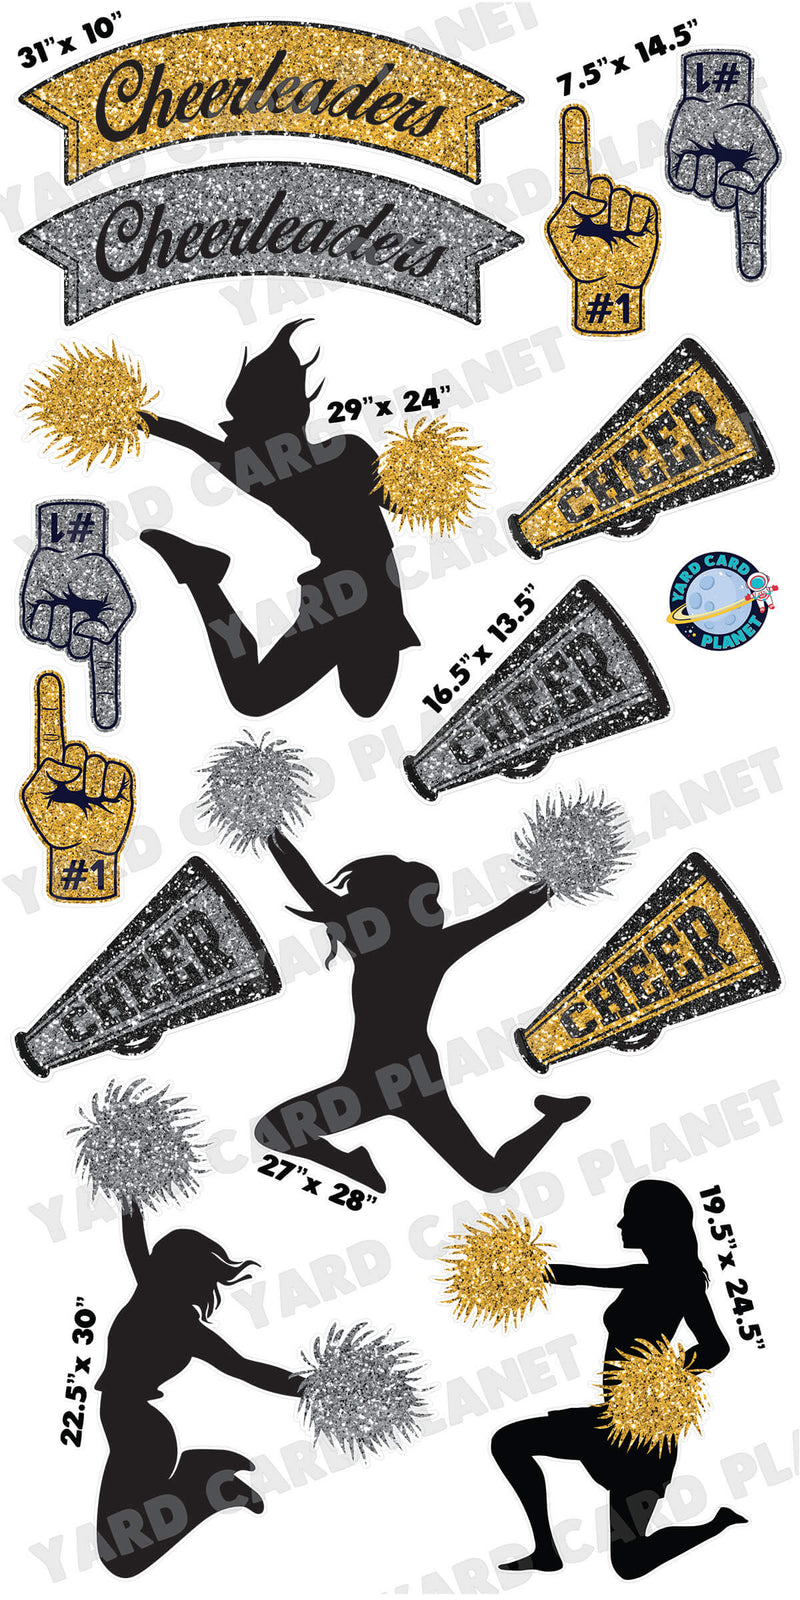 Cheerleading Glittered and Silhouette Yard Card Flair Set